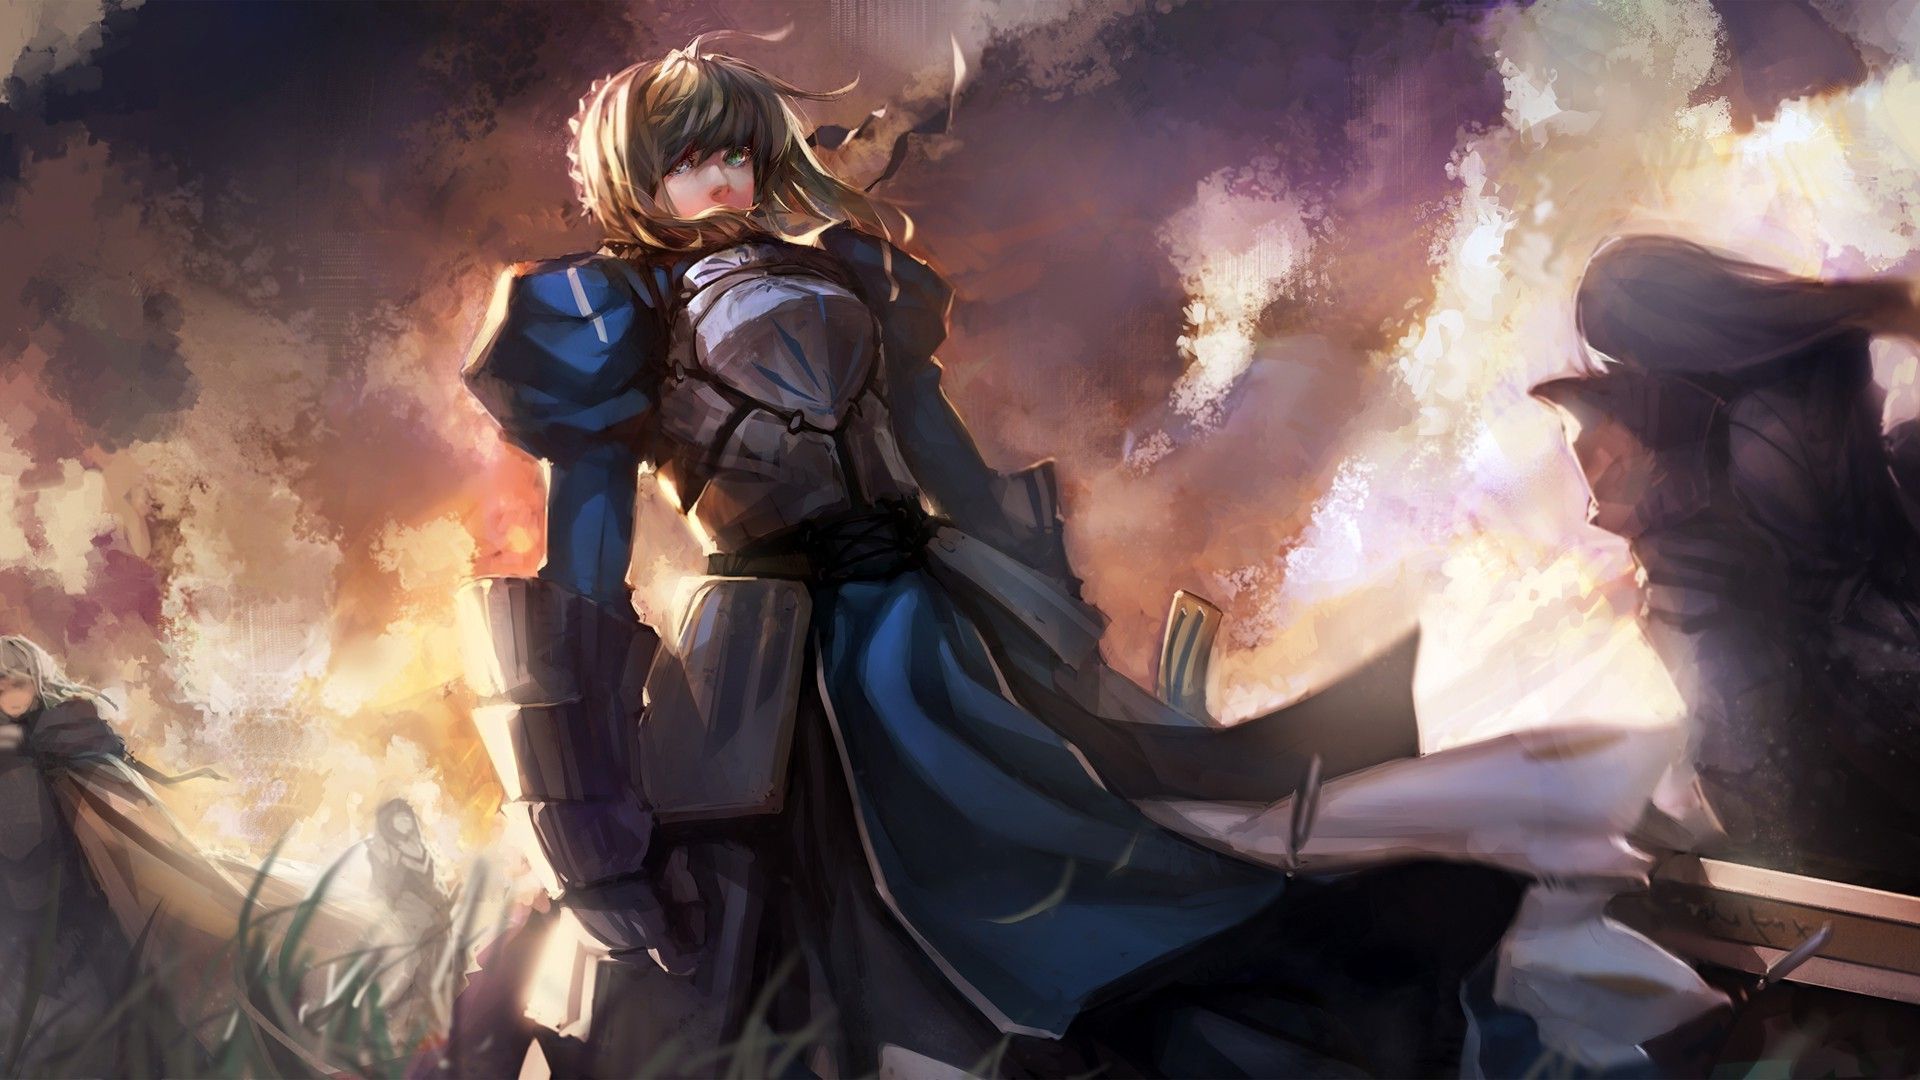 Saber   Fate stay night wallpaper   1023688